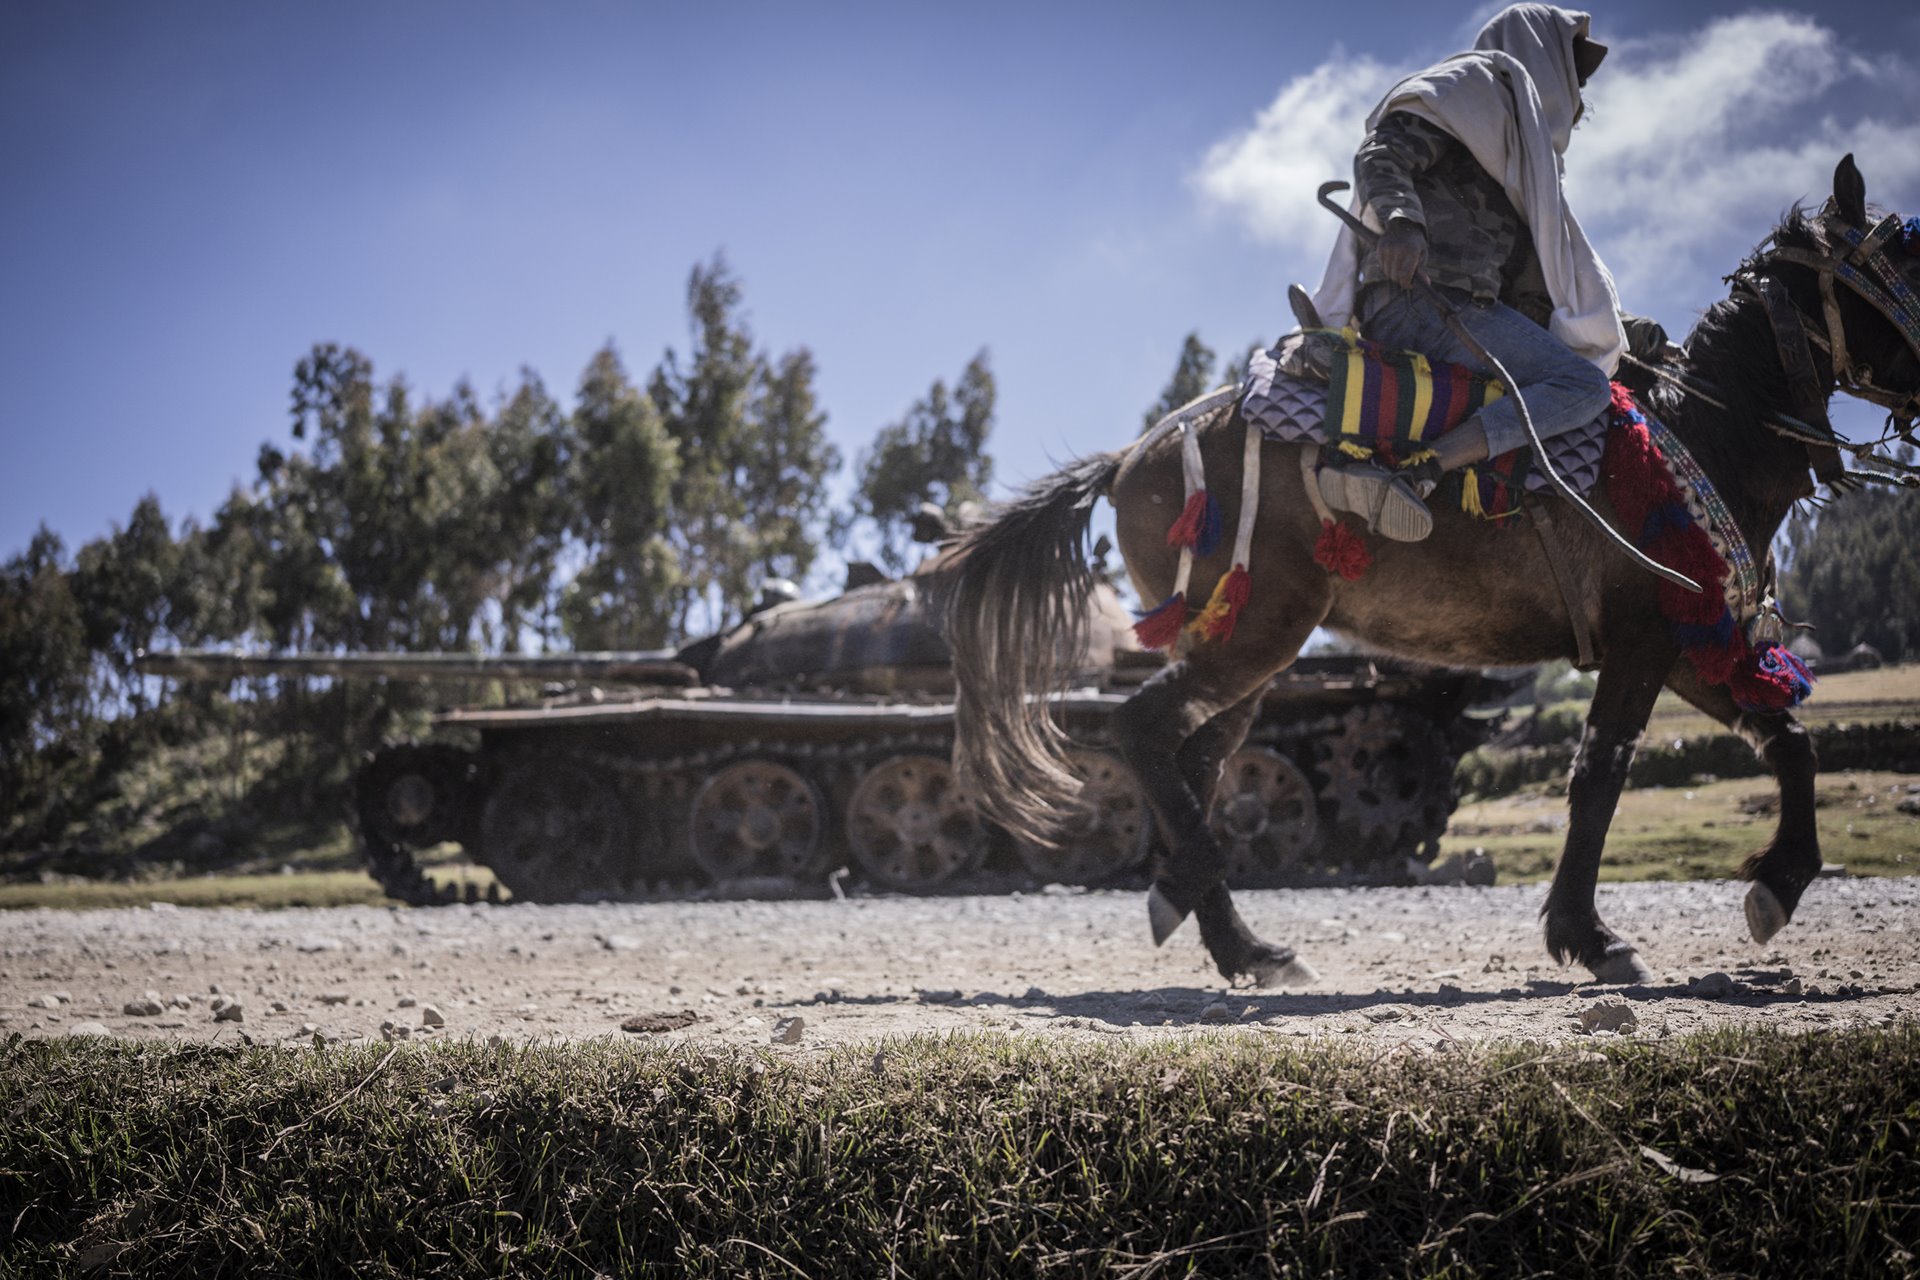 A rider passes a destroyed tank, in Mesobit, Amhara, Ethiopia.